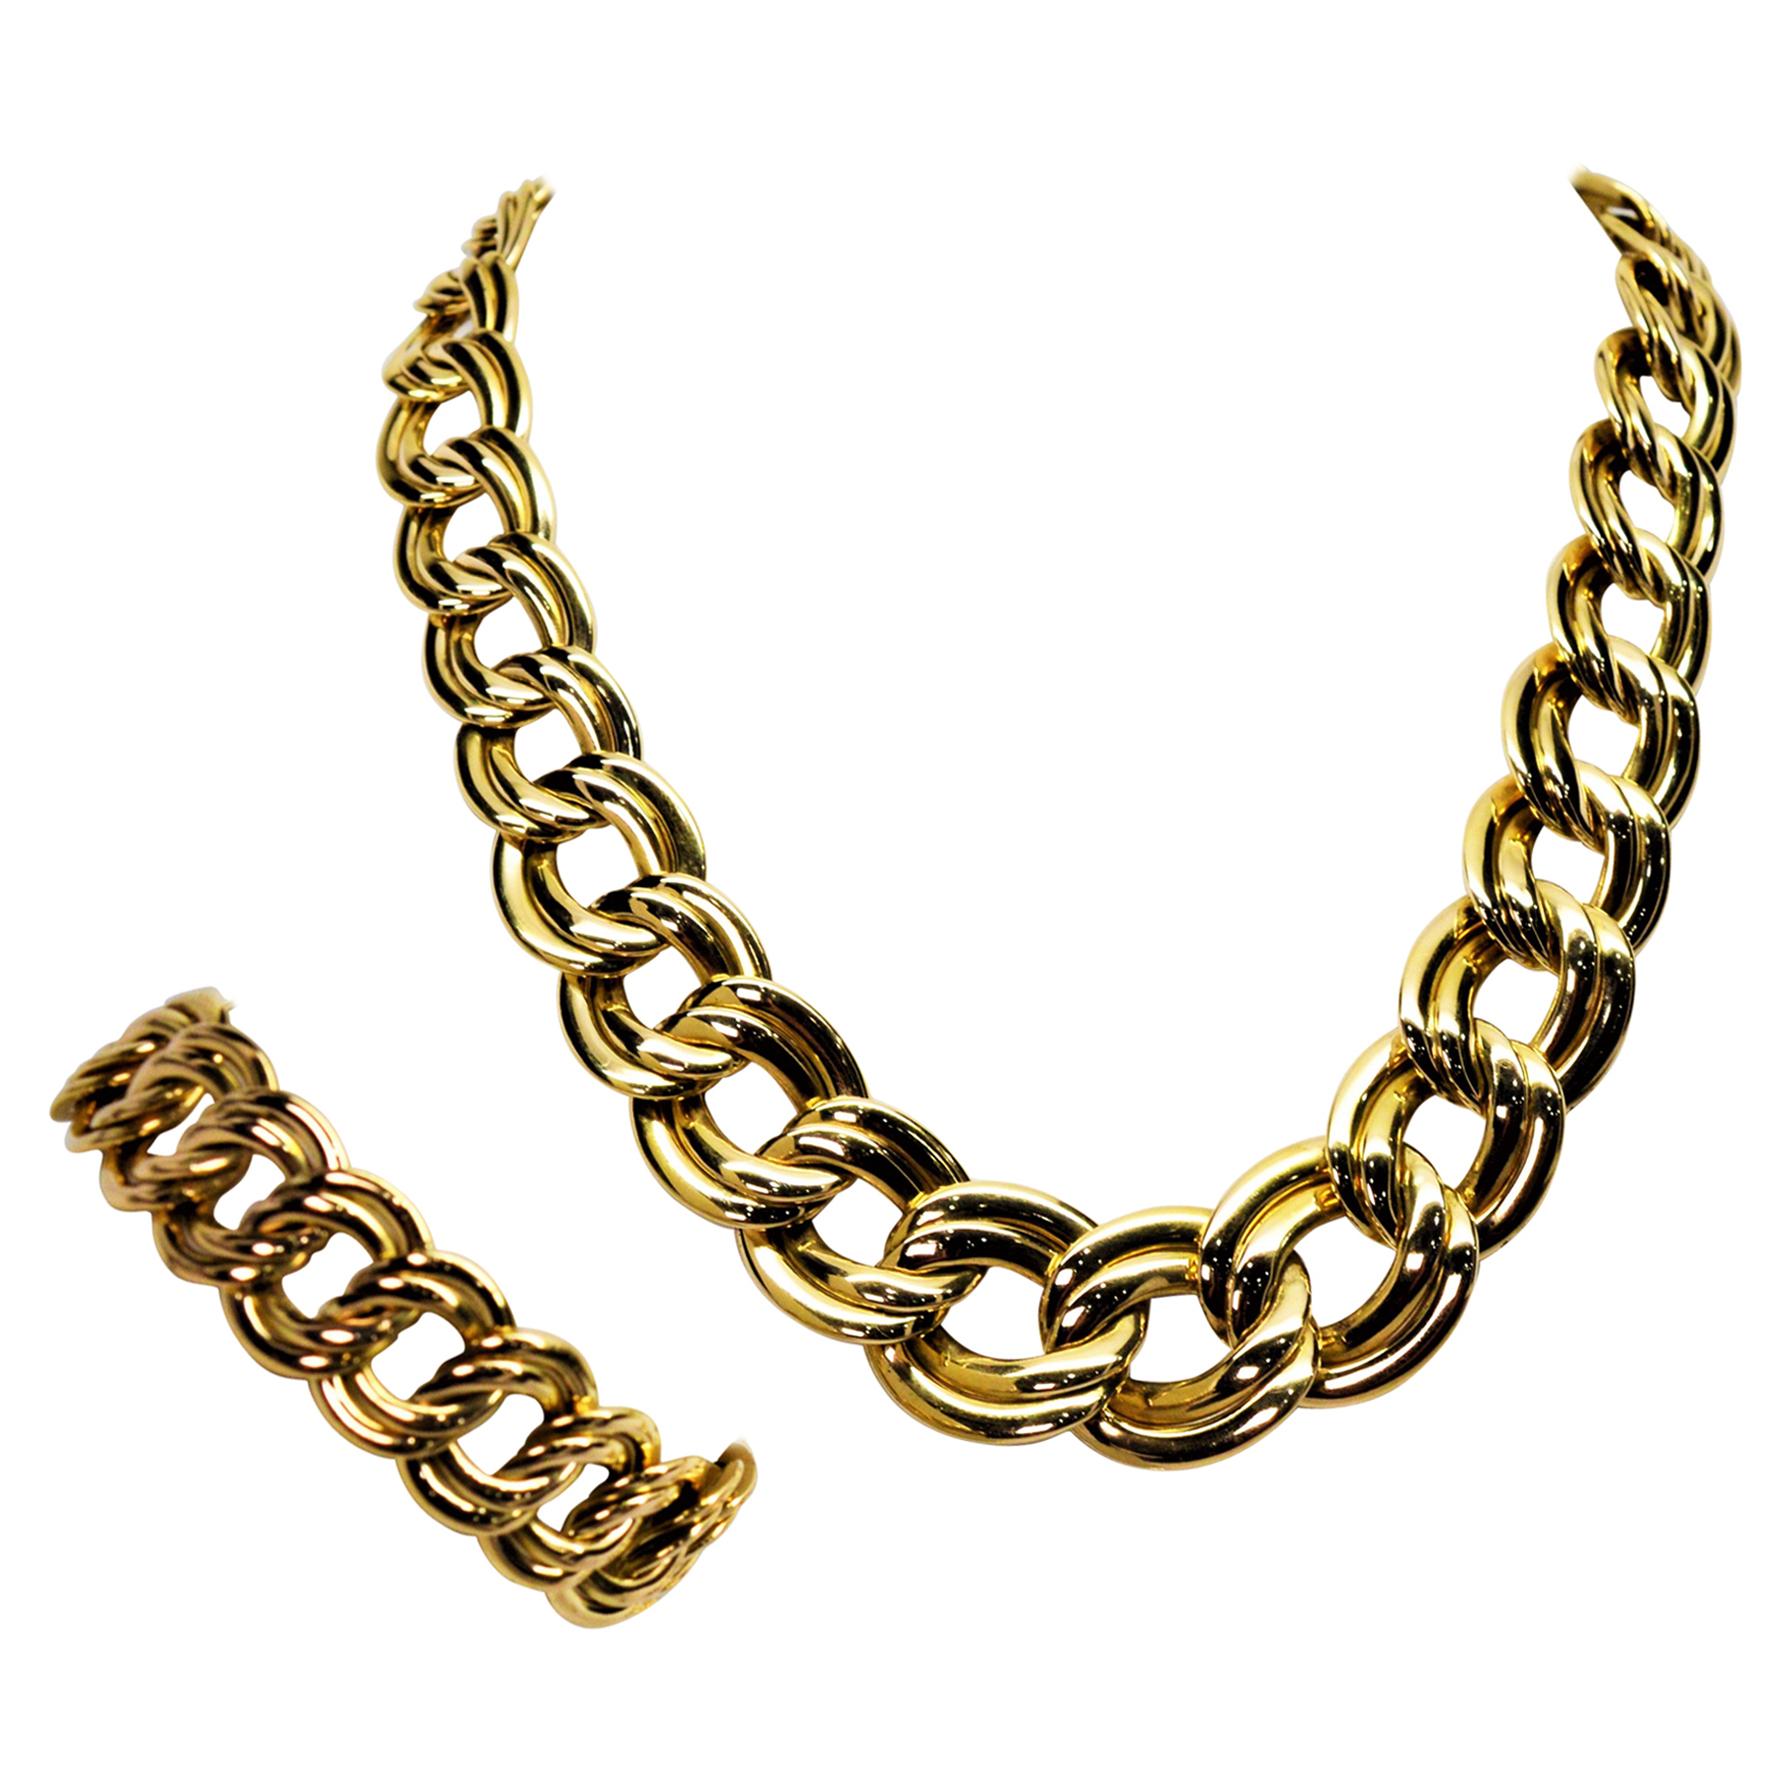 Italian Double Link Chain 14 Karat Yellow Gold Necklace and Bracelet Set